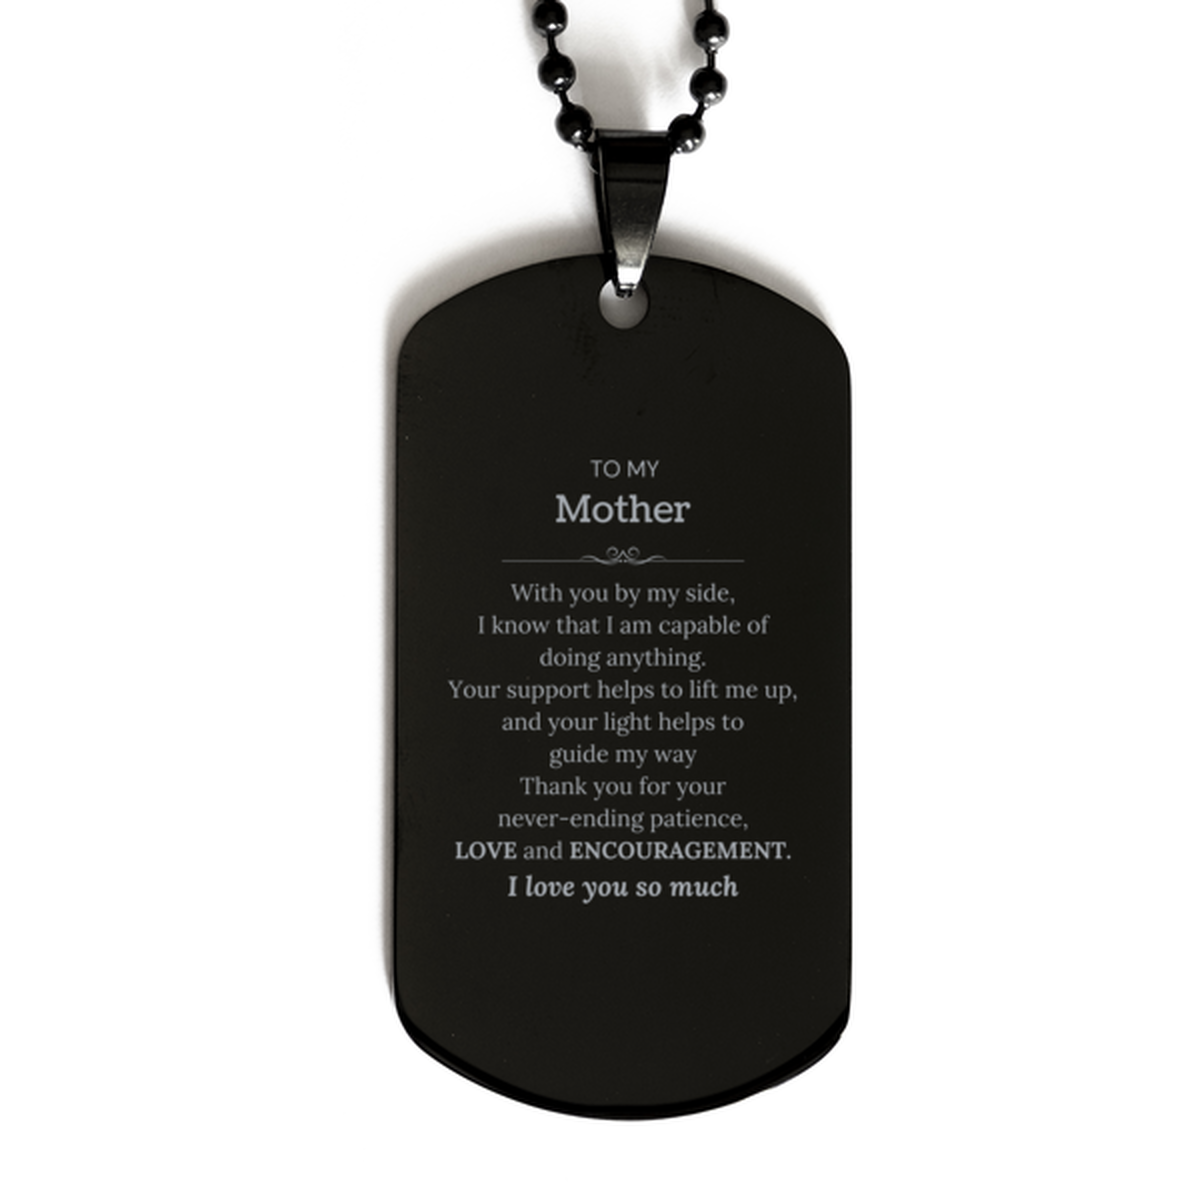 Appreciation Mother Black Dog Tag Gifts, To My Mother Birthday Christmas Wedding Keepsake Gifts for Mother With you by my side, I know that I am capable of doing anything. I love you so much